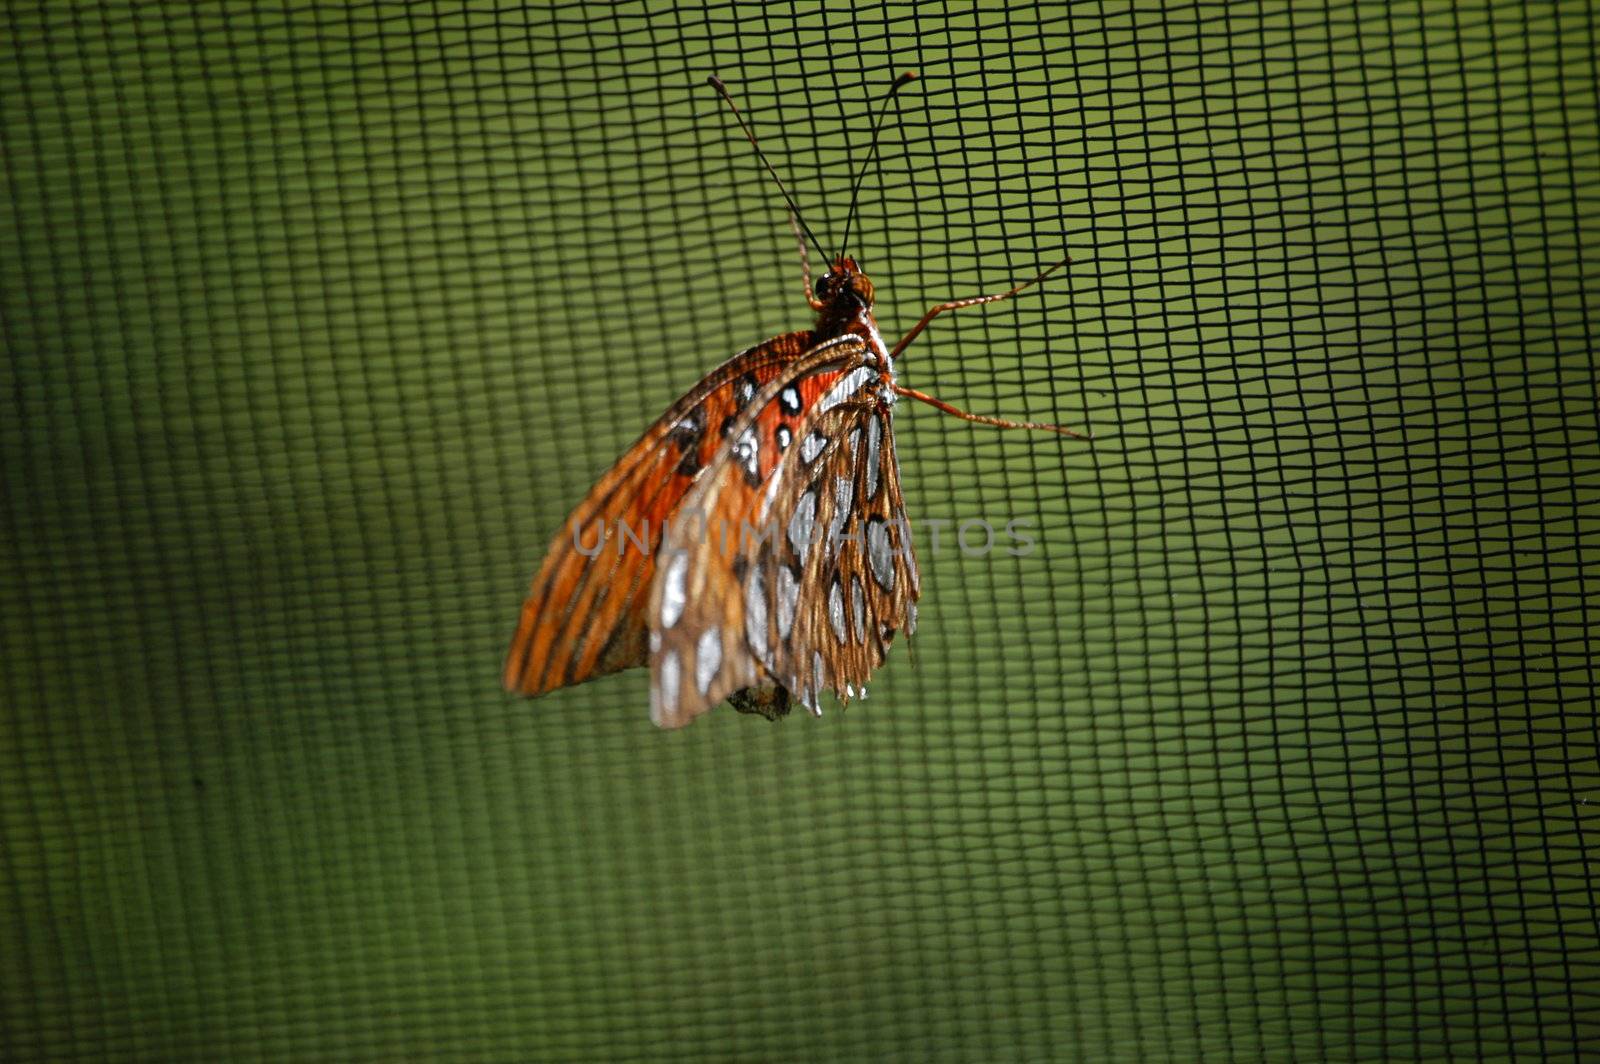 A close of a butterfly taken at a nature center in North Carolina